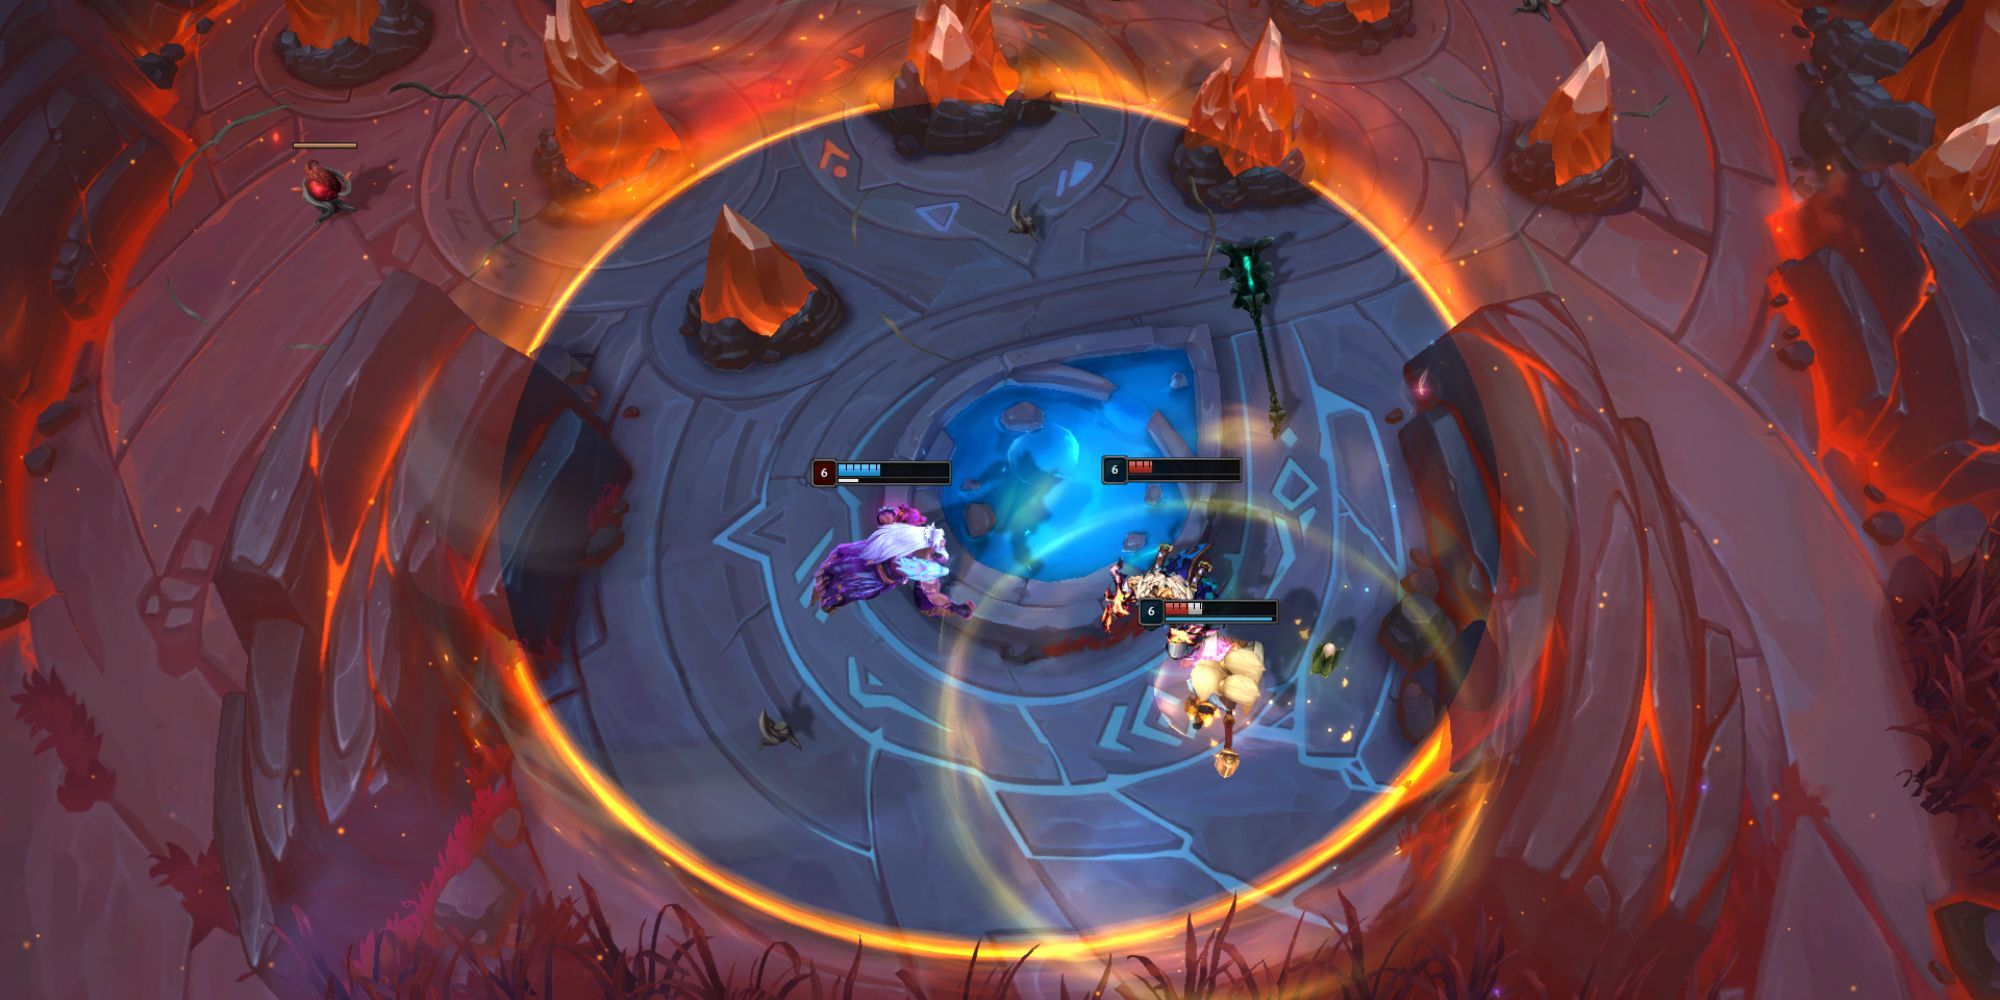 Check out League of Legends Arena, LoL's new game mode